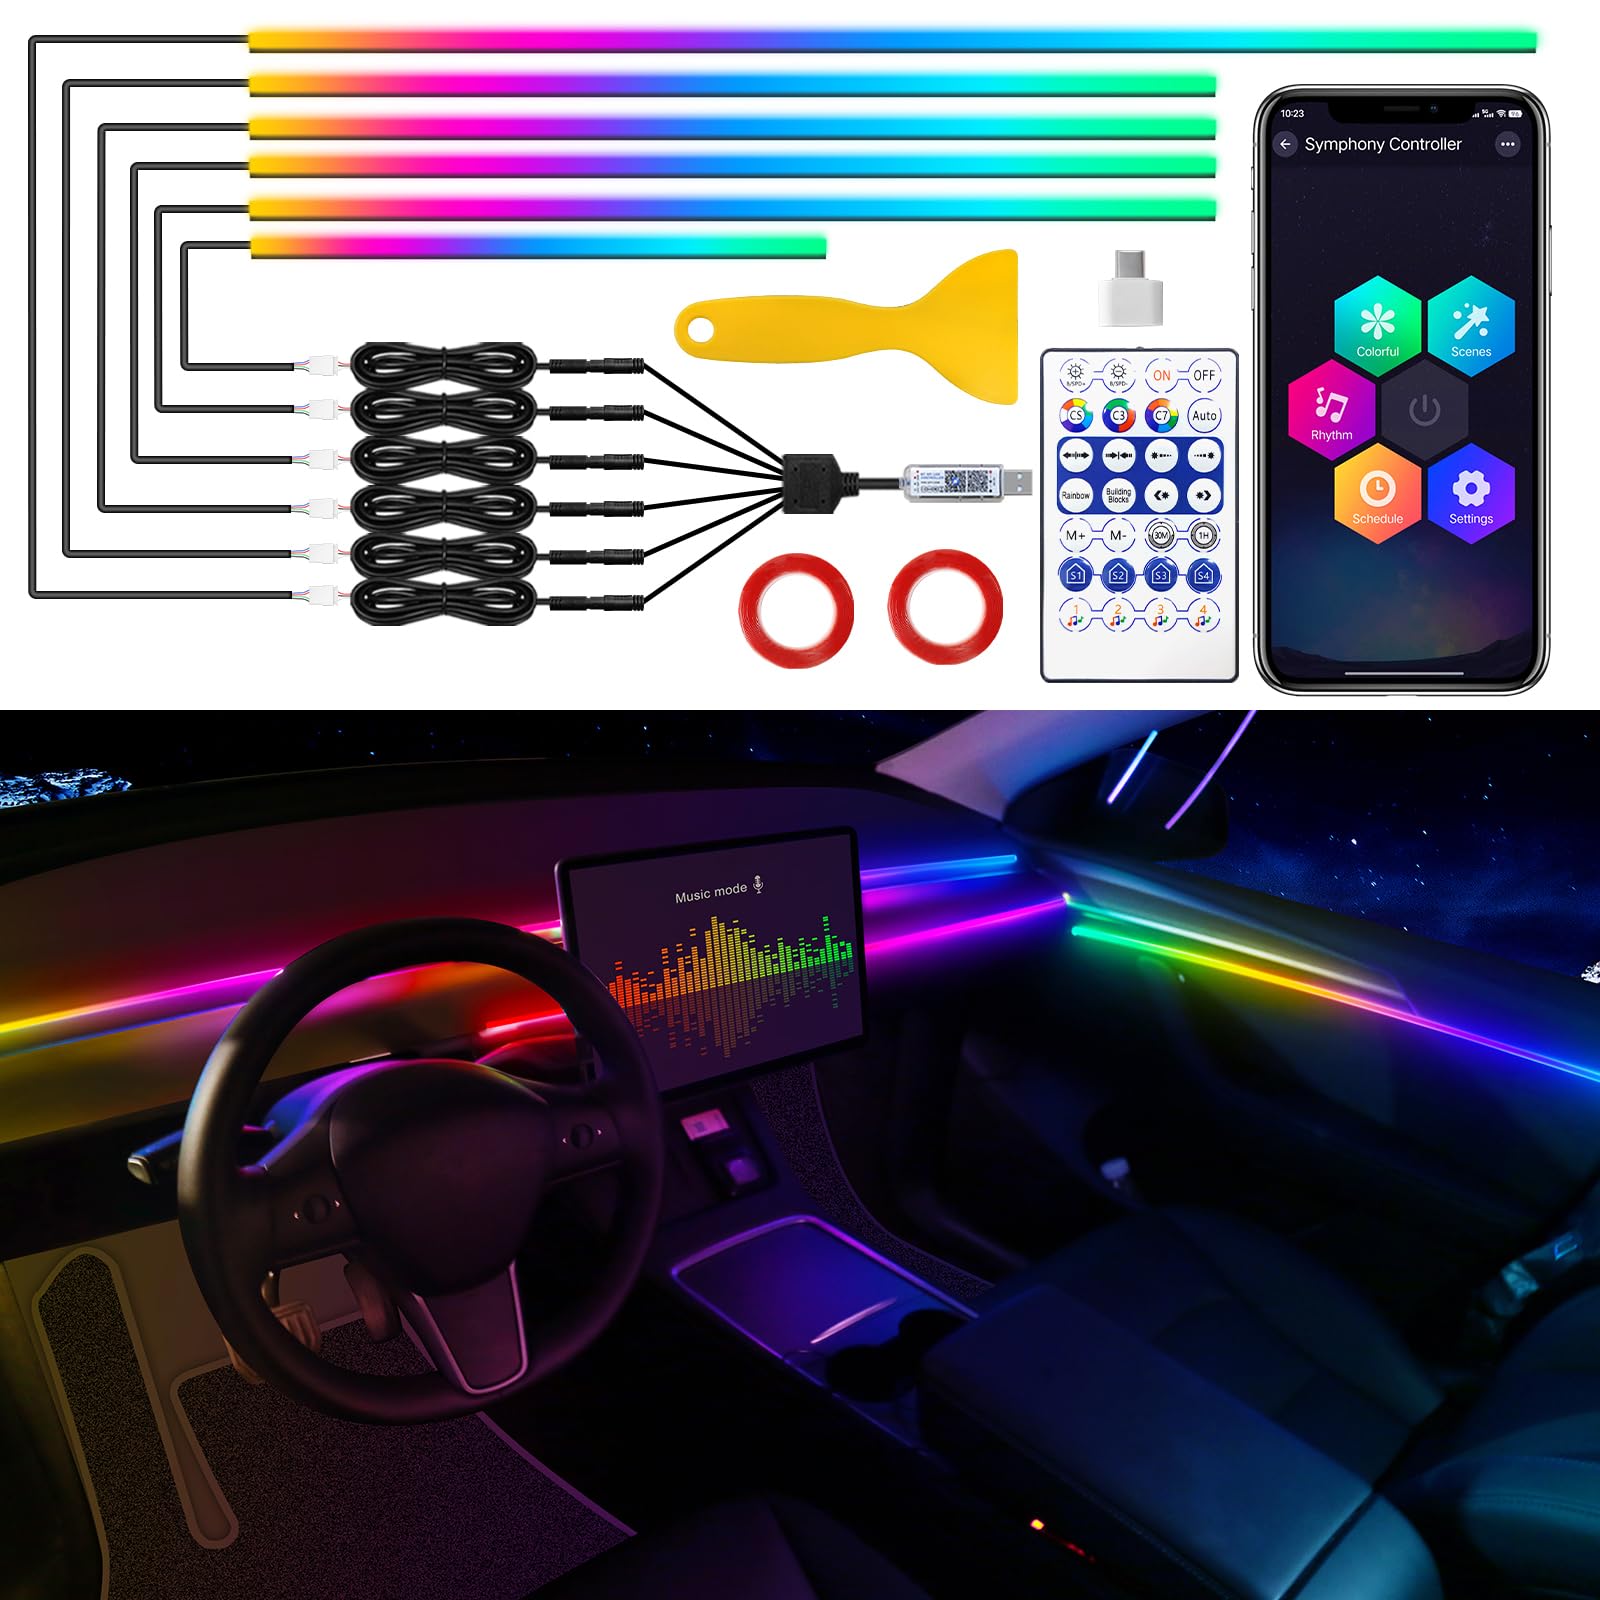 Tesla Model 3/Y/S/X Dreamcolor Acrylic Interior Car LED Strip Light with USB/Type C, RGB 6 in 1 with 187 inches 650 LEDs Strip for Tesla, Dynamic Chasing Music Sync Neon Tesla Ambient Lighting Kits von TWETIZ